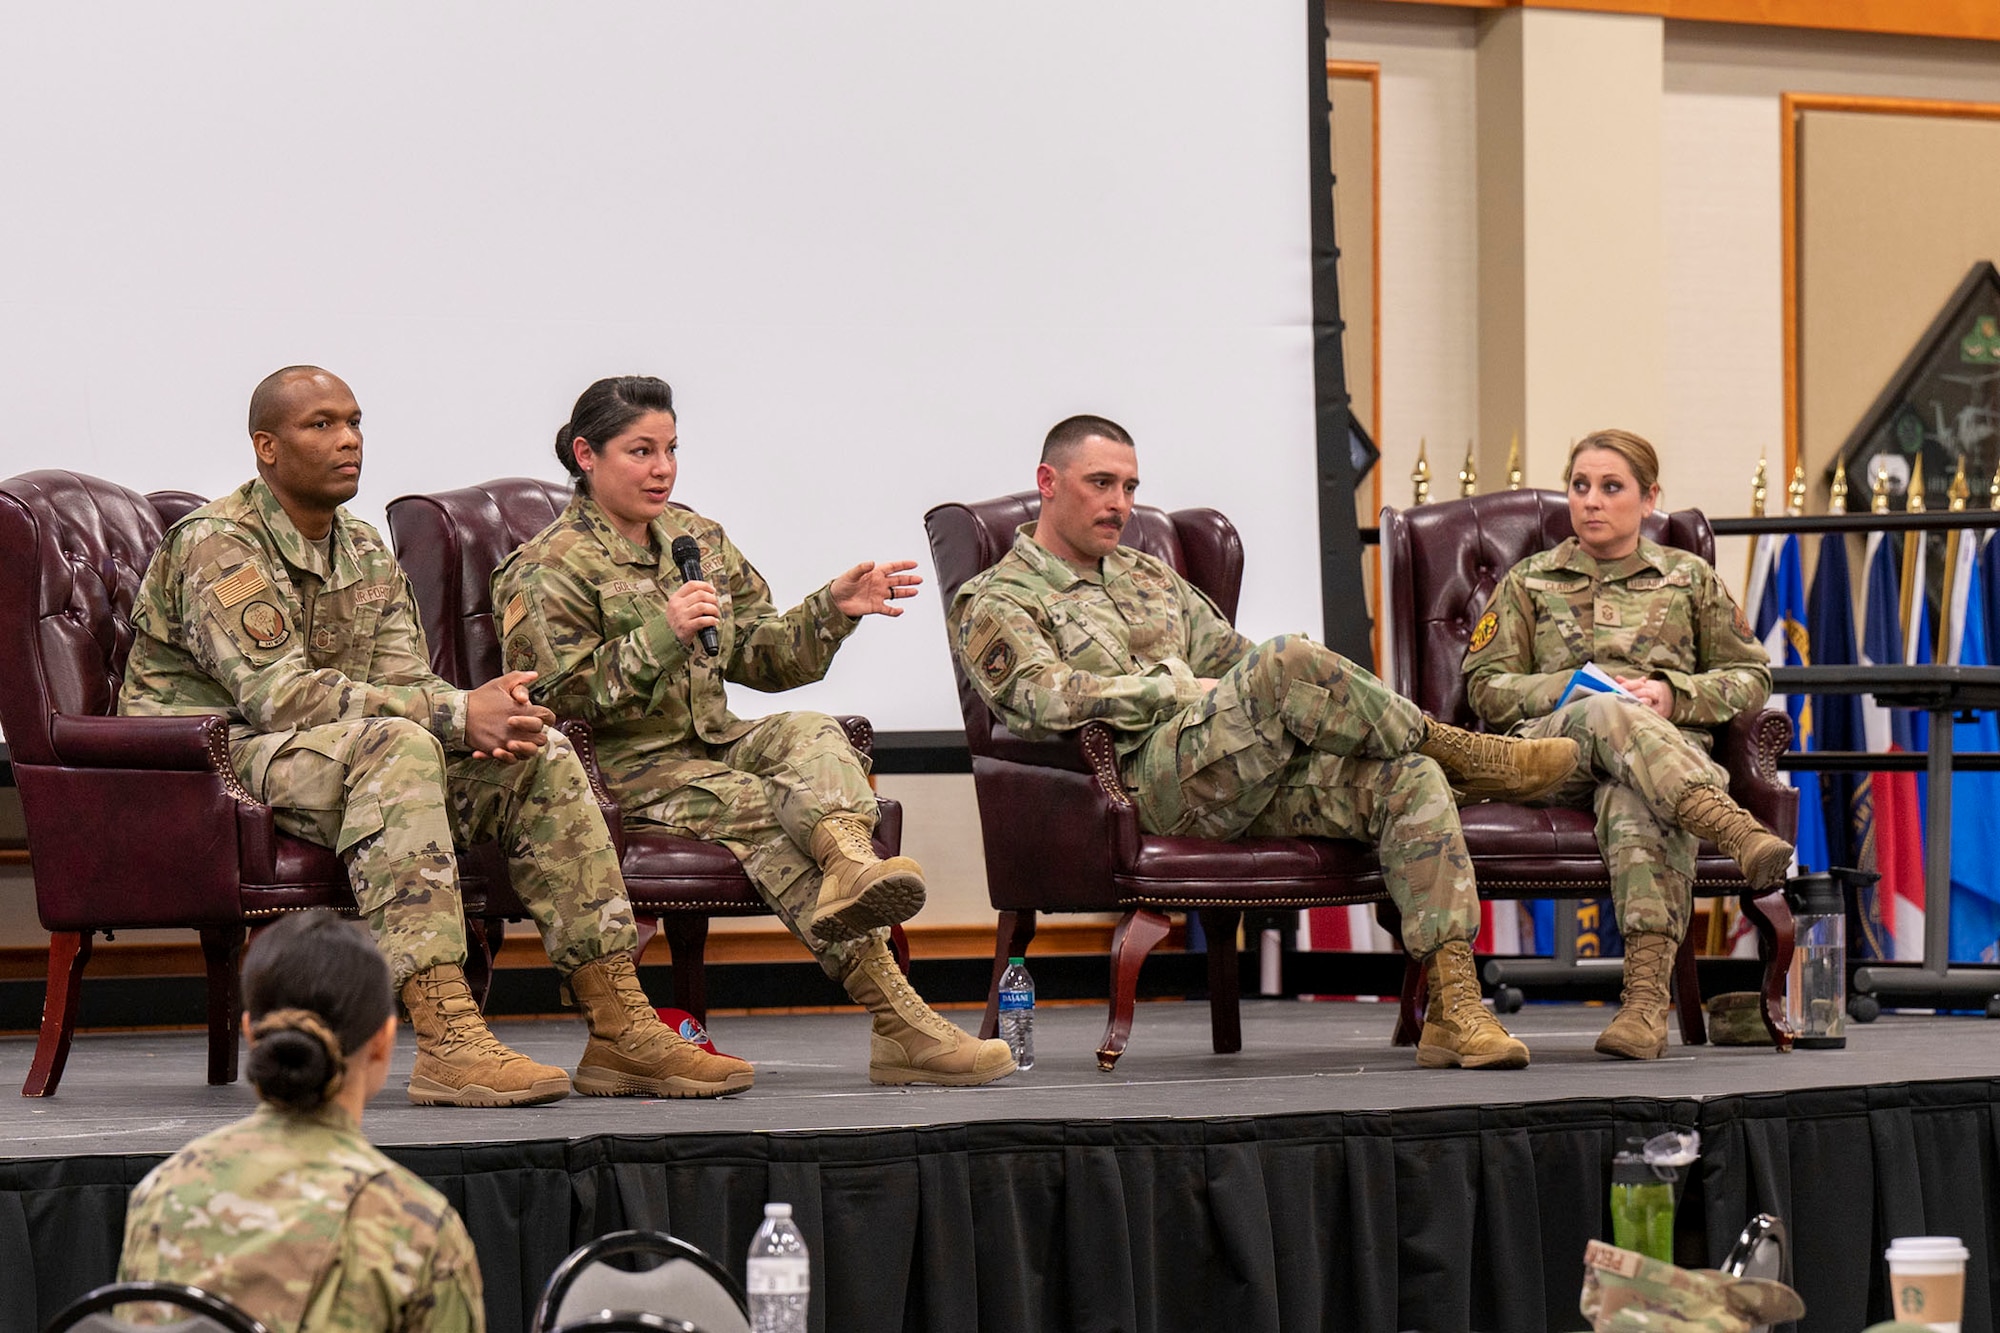 Maj. Katherine Roman, 40th Helicopter Squadron resource advisor, left, and Lt. Col. Julia Roloson, 341st Security Forces Squadron commander, speak at an all-female officers' panel during a women's leadership symposium March 21, 2023, at Malmstrom Air Force Base, Mont. The two-day symposium was open to all on base and covered a wide range of topics to include leadership, mentorship, retention, wellness and readiness. (U.S. Air Force photo by Airman Hannah Hardy)